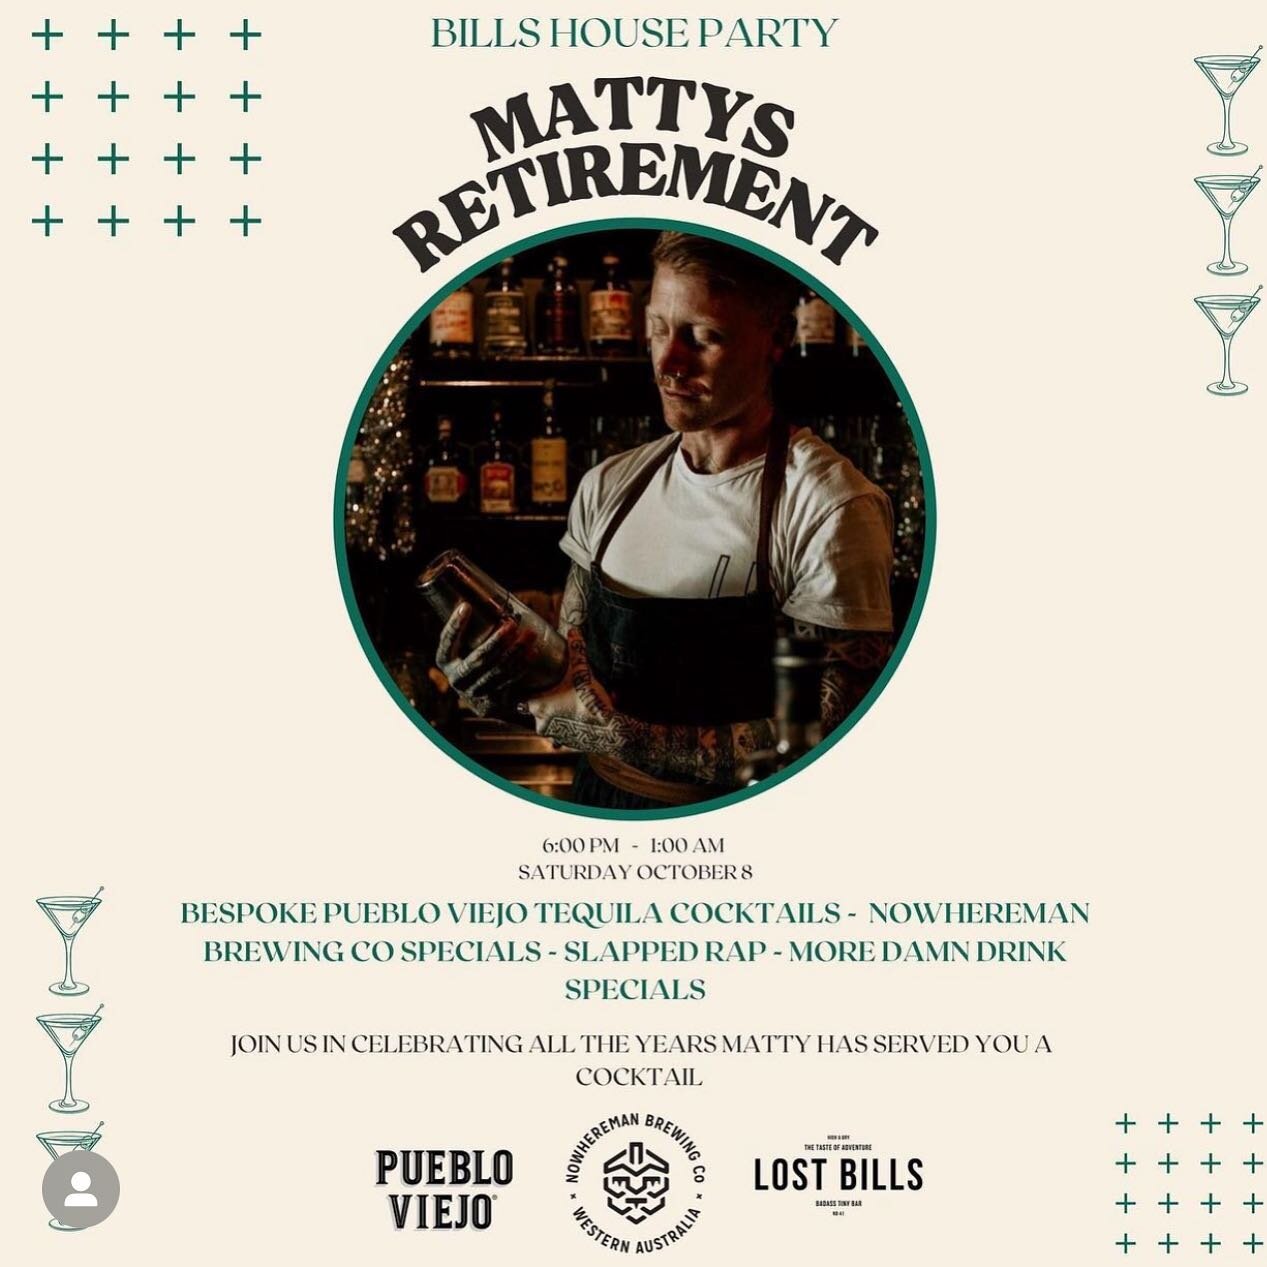 Heading in tonight to say farewell to Matty? Doors open from 5pm till late with drinks specials all night for the big man himself!
See you soon.